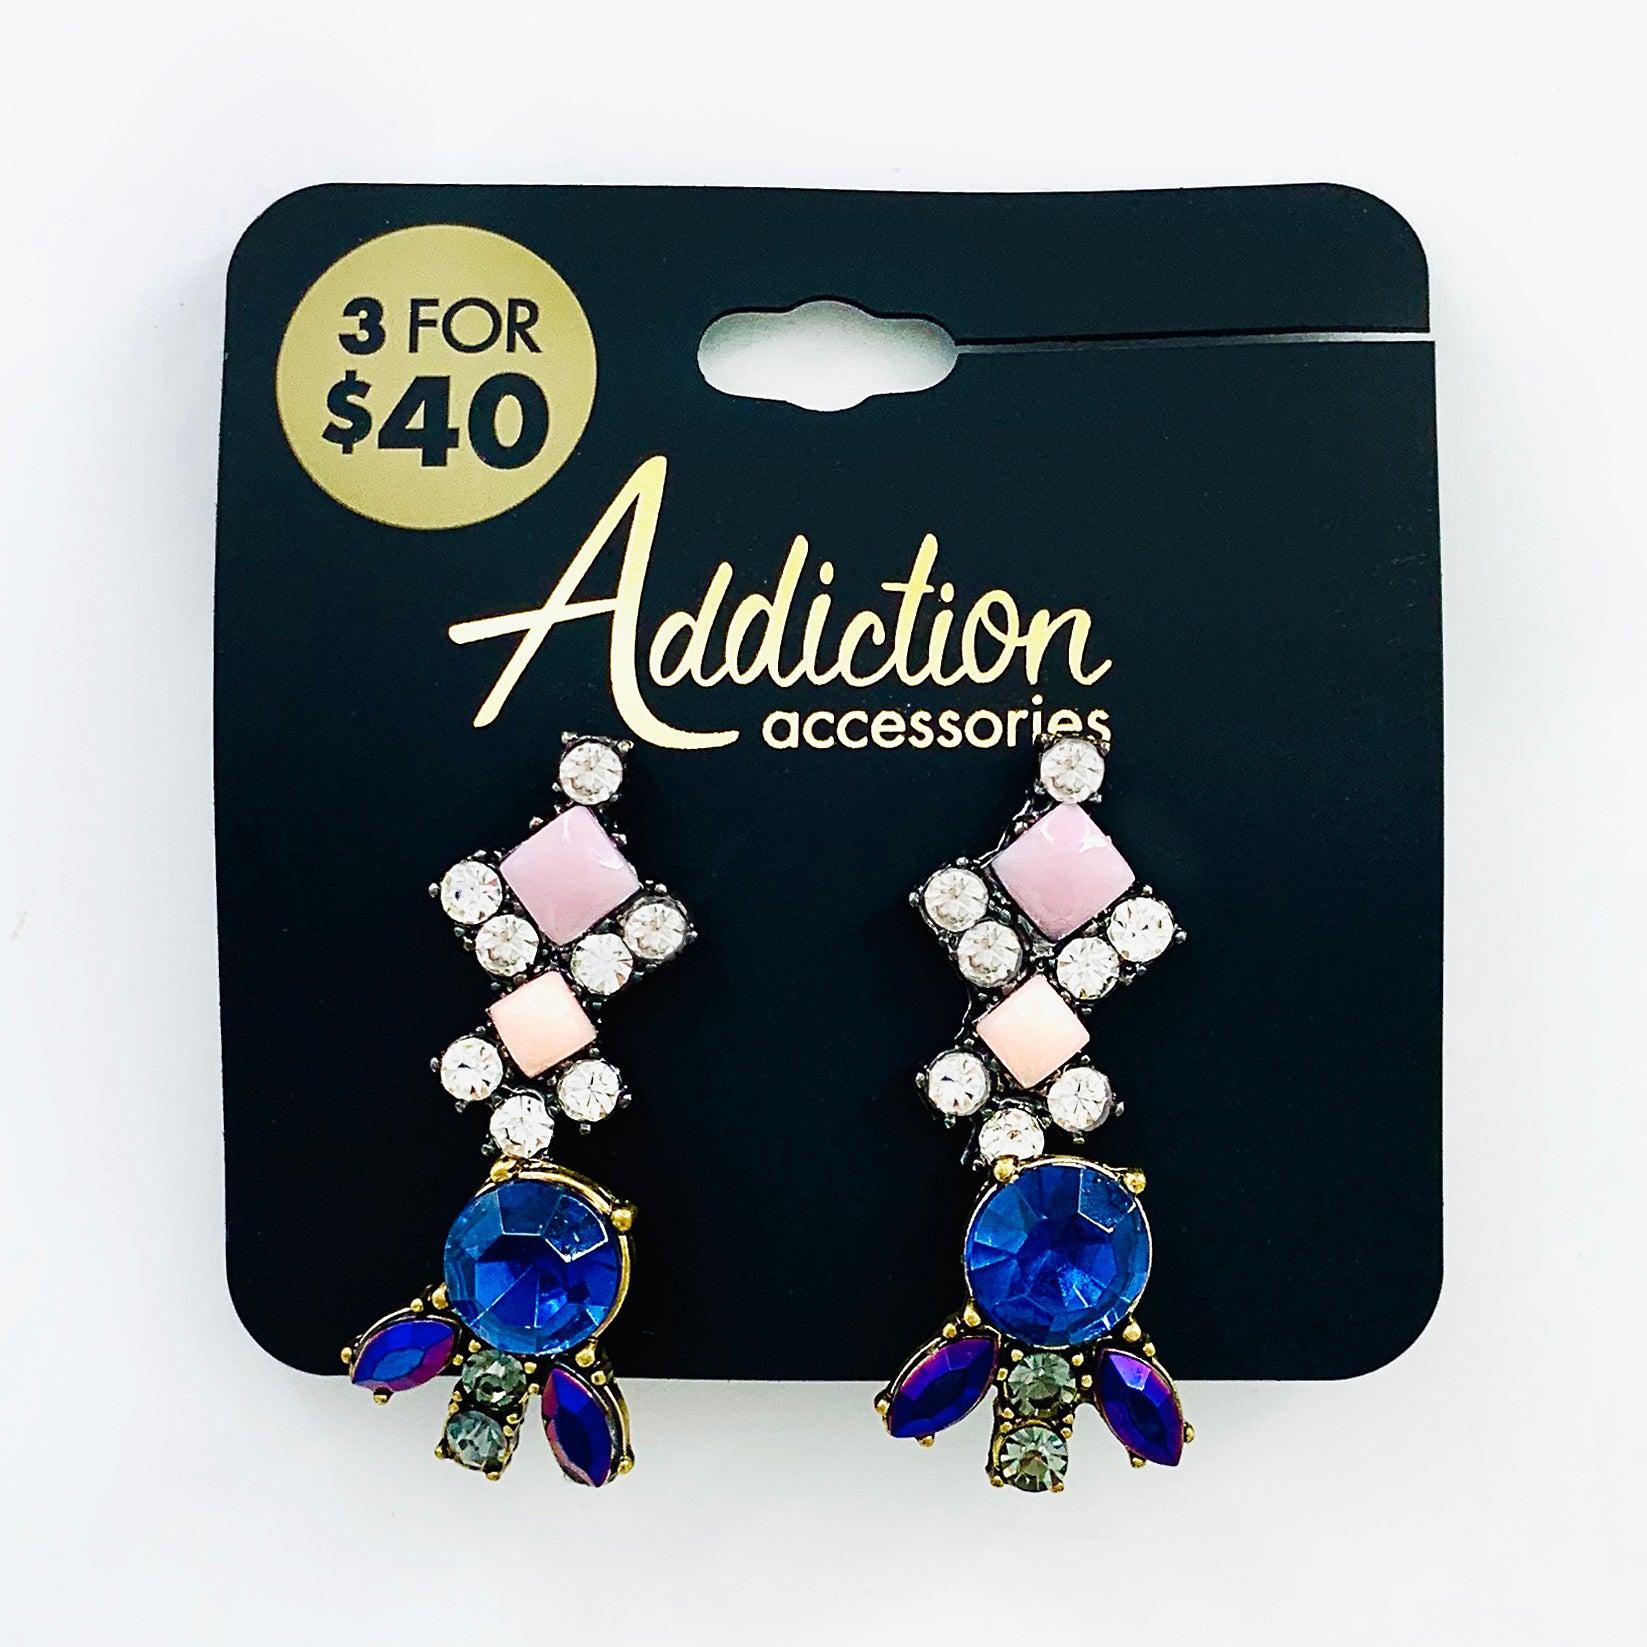 Double pair of earrings with pink and blue stones